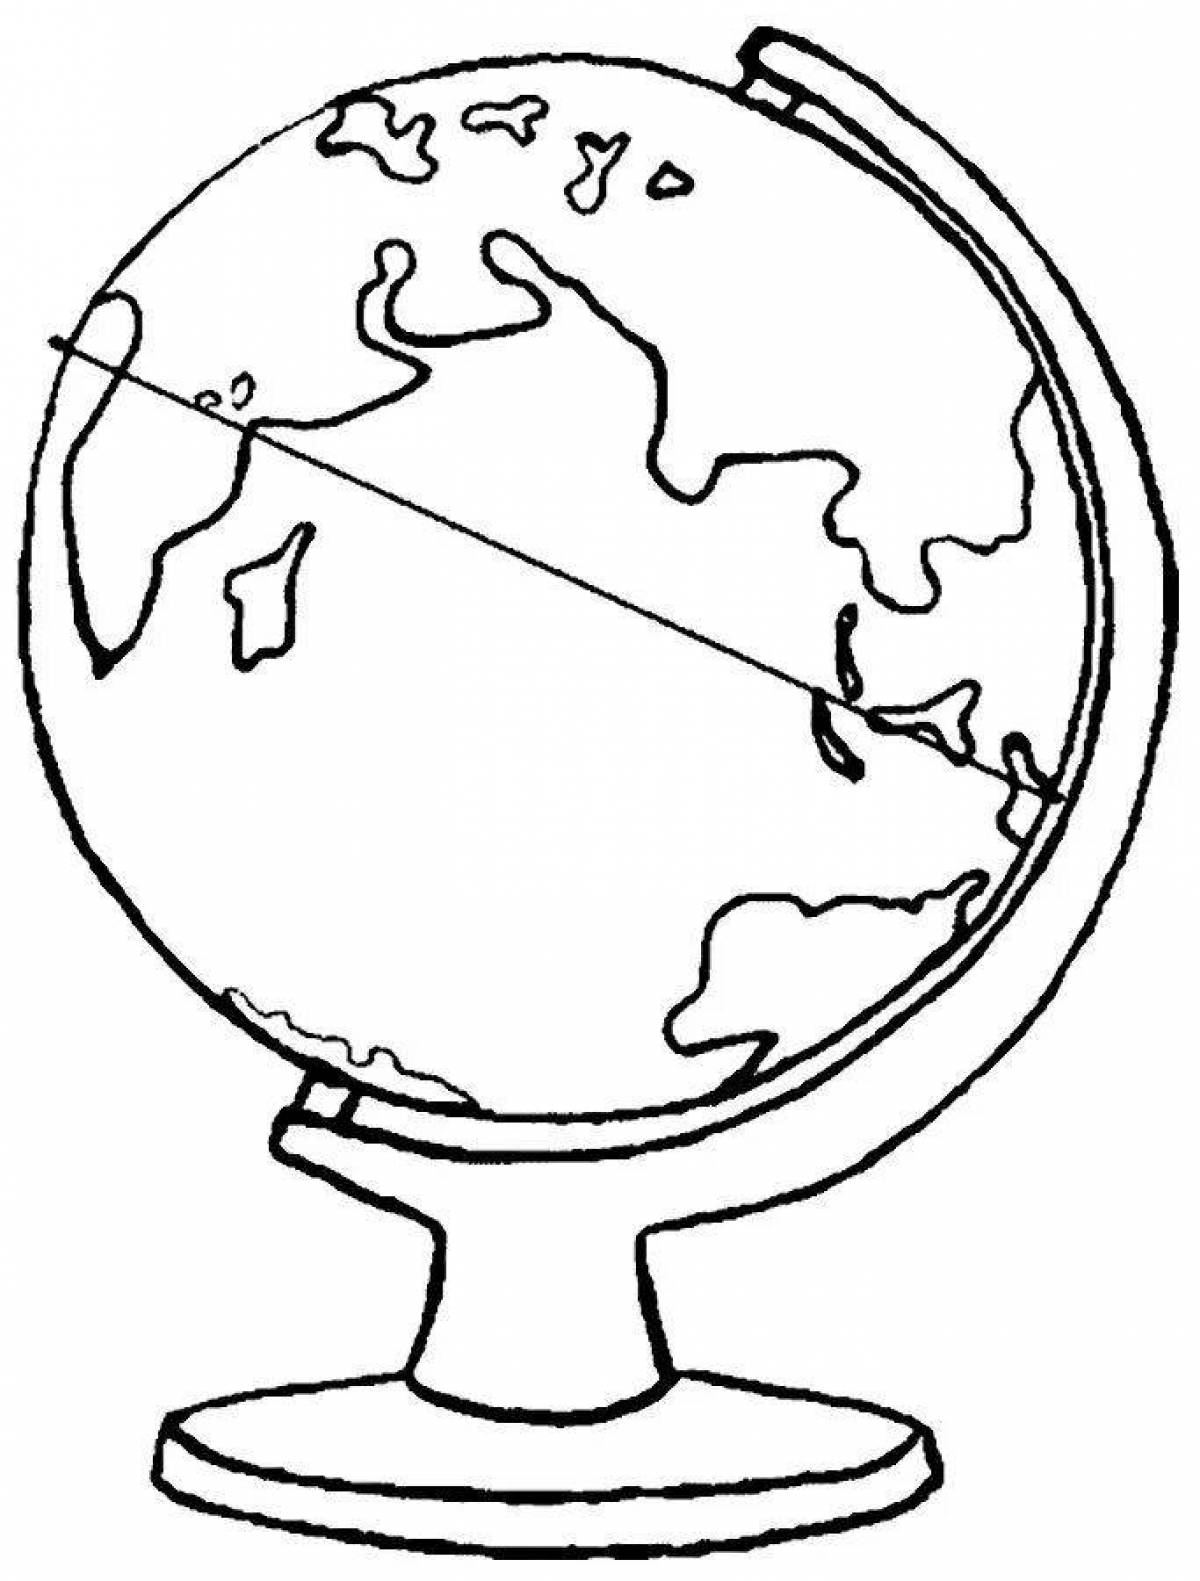 Mysterious globe coloring page